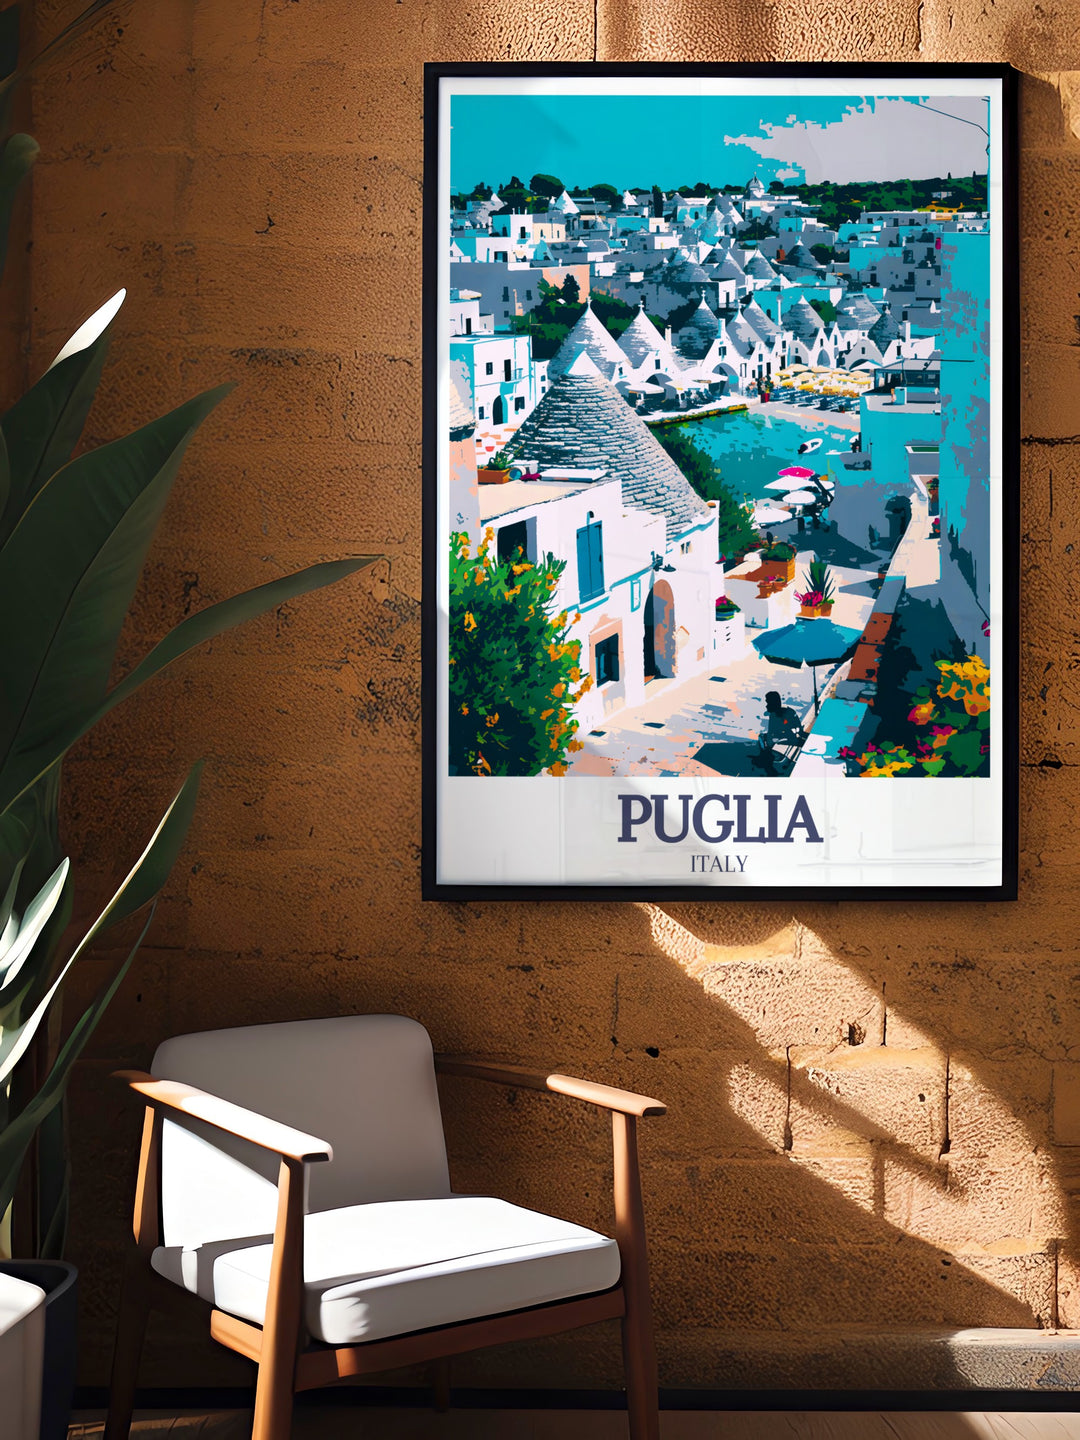 Bring the charm of Trulli houses and the Adriatic Sea into your home with our Puglia Art. This Italy Travel Print captures the essence of Italys picturesque landscapes, perfect for those who appreciate fine Italian art and decor.